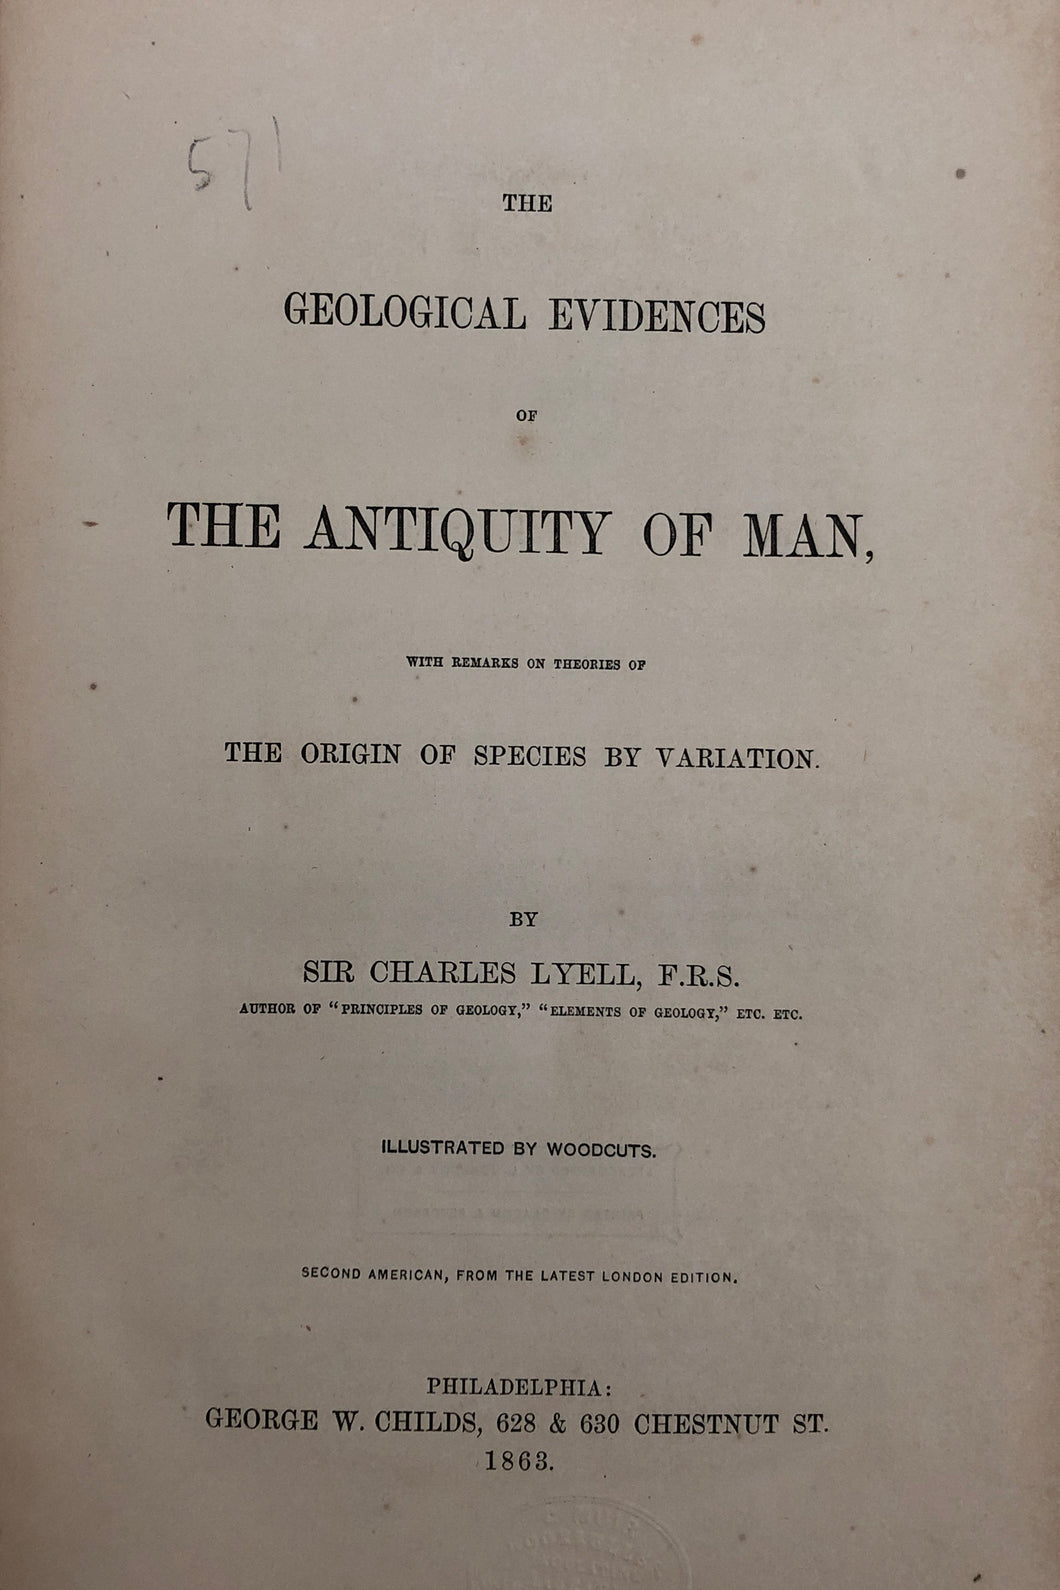 The geological evidences of the antiquity of man : with remarks on theories of the origin of species by variation